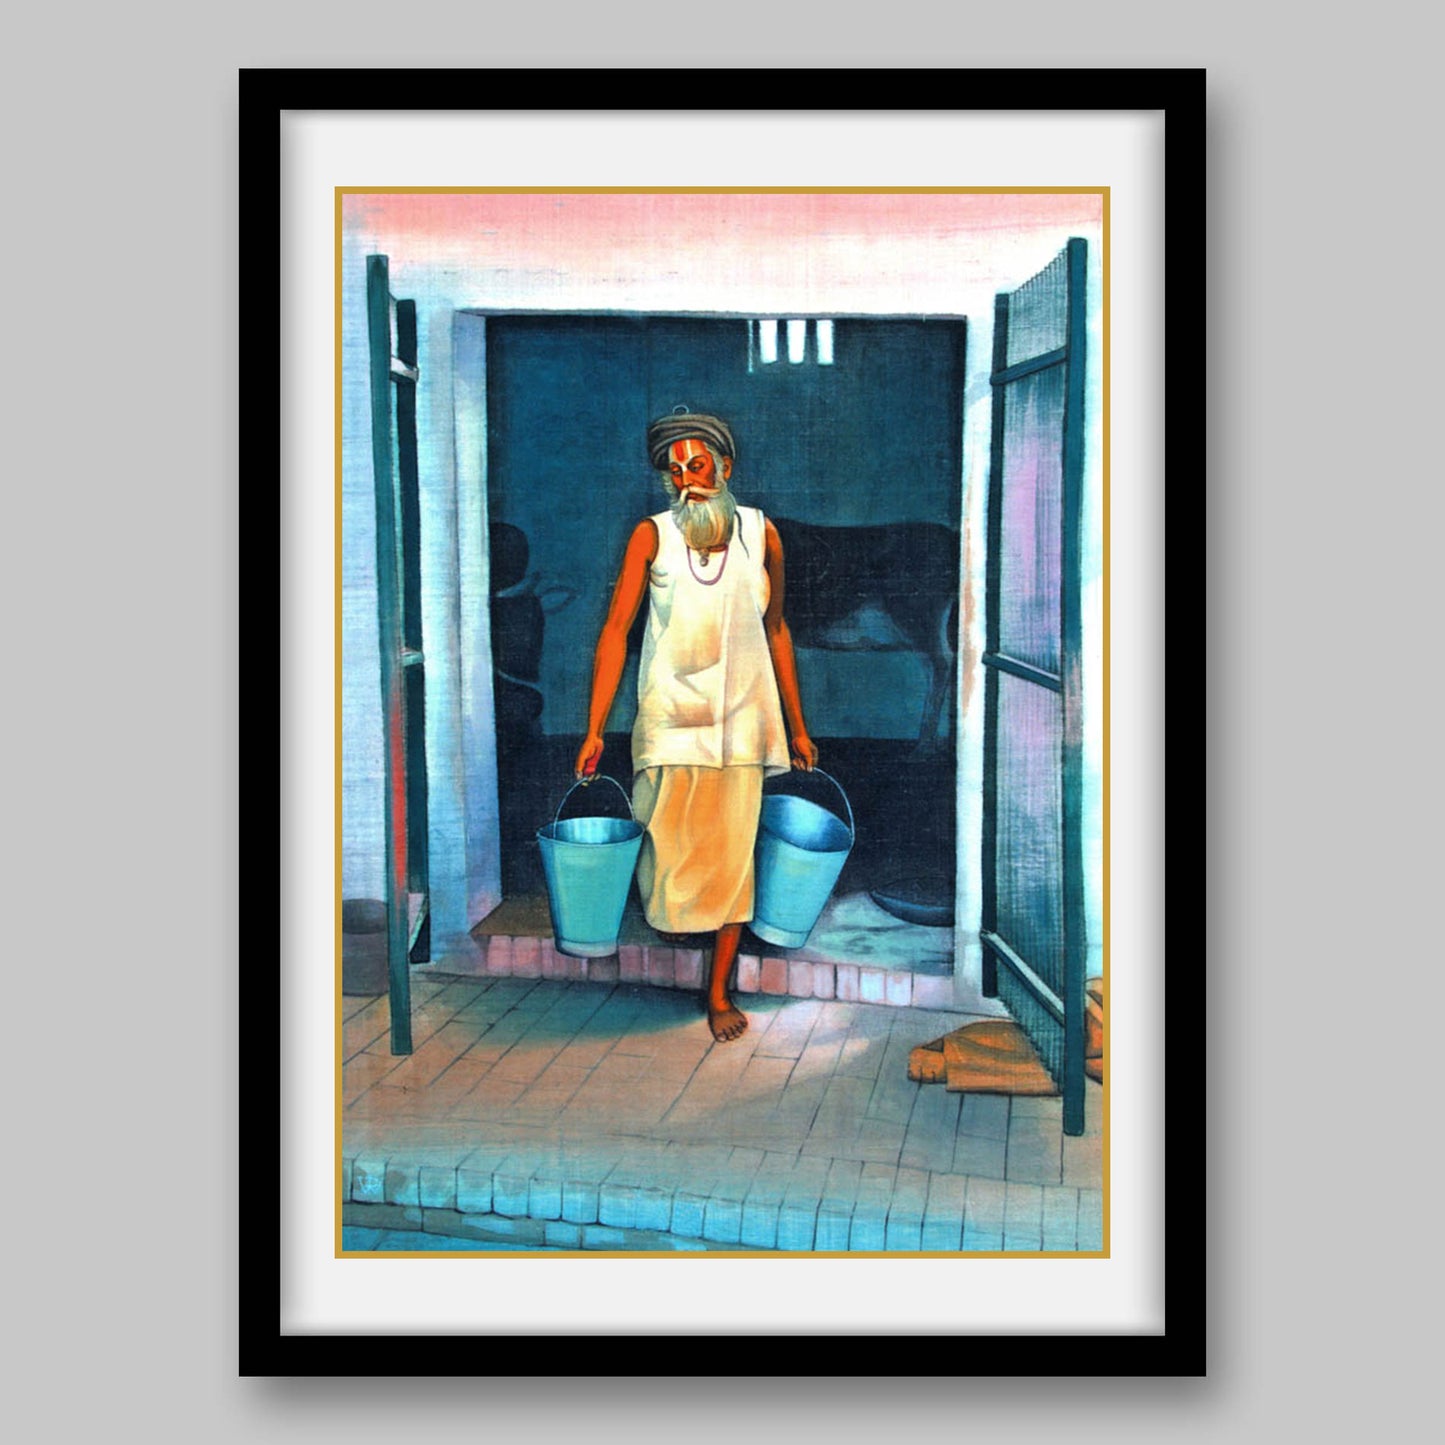 Sadhu with Buckets - High Quality Print of Artwork by Pieter Weltevrede